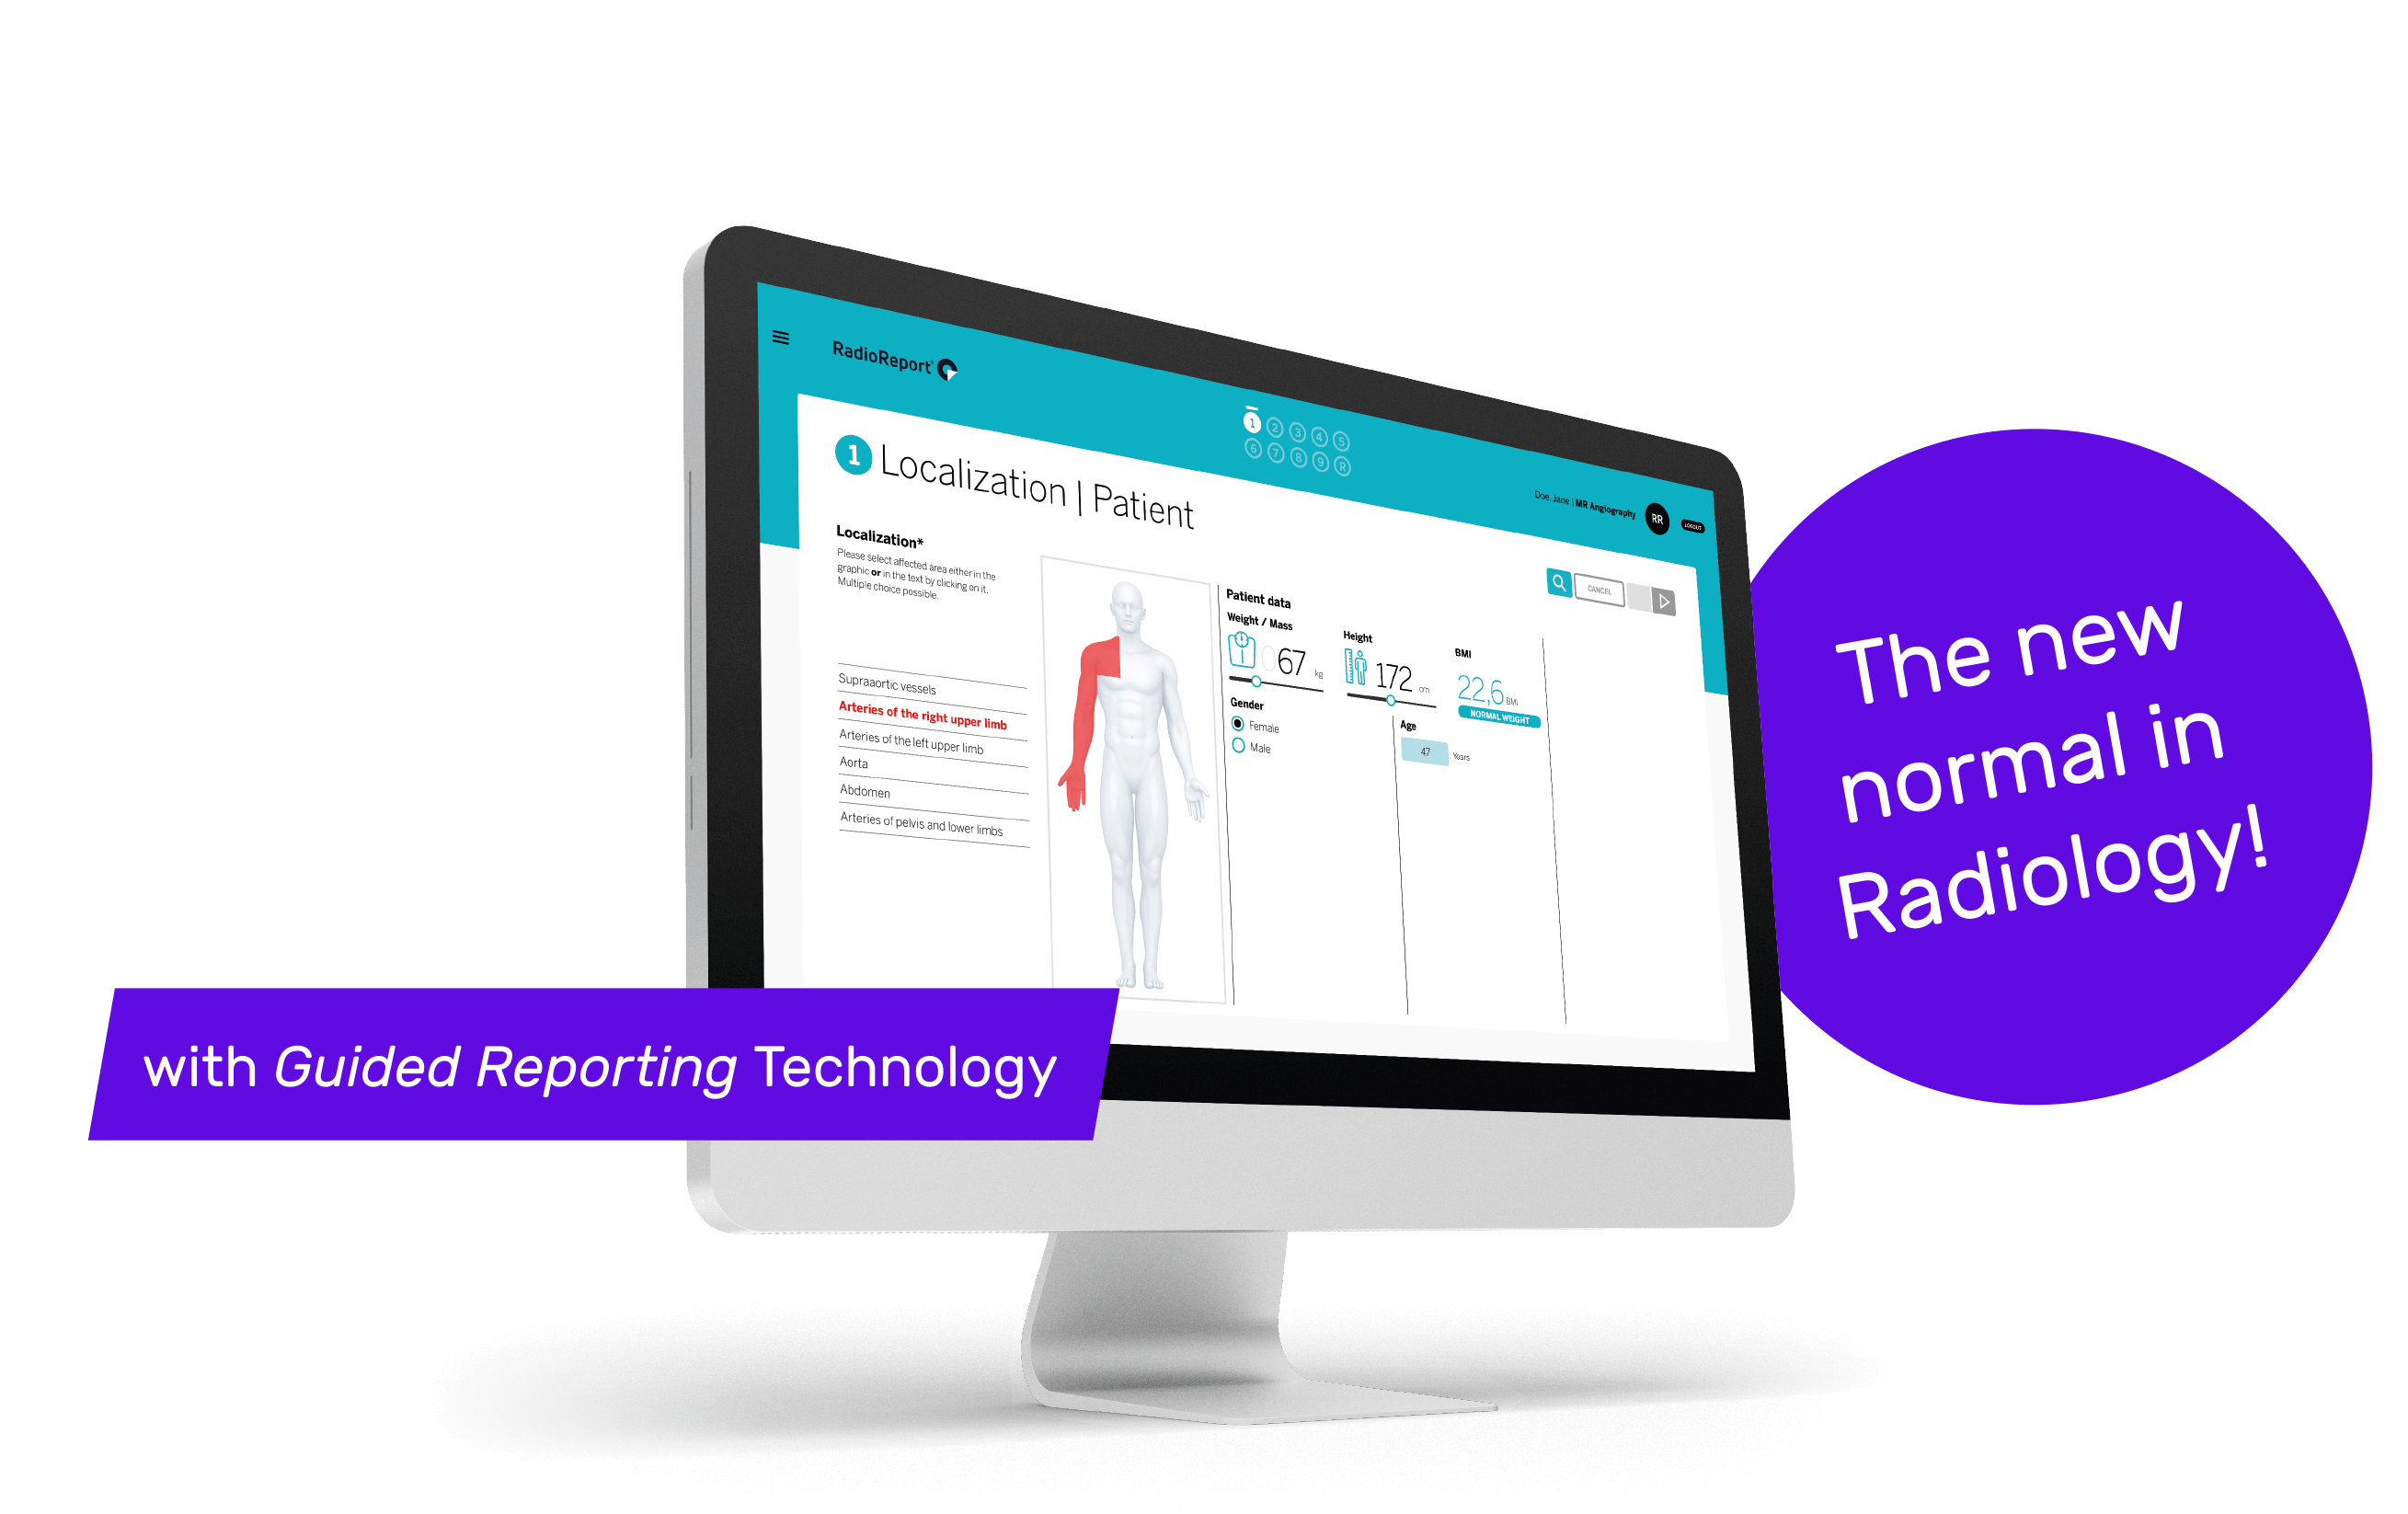 Reporting 3.0 – The new normal in Radiology!